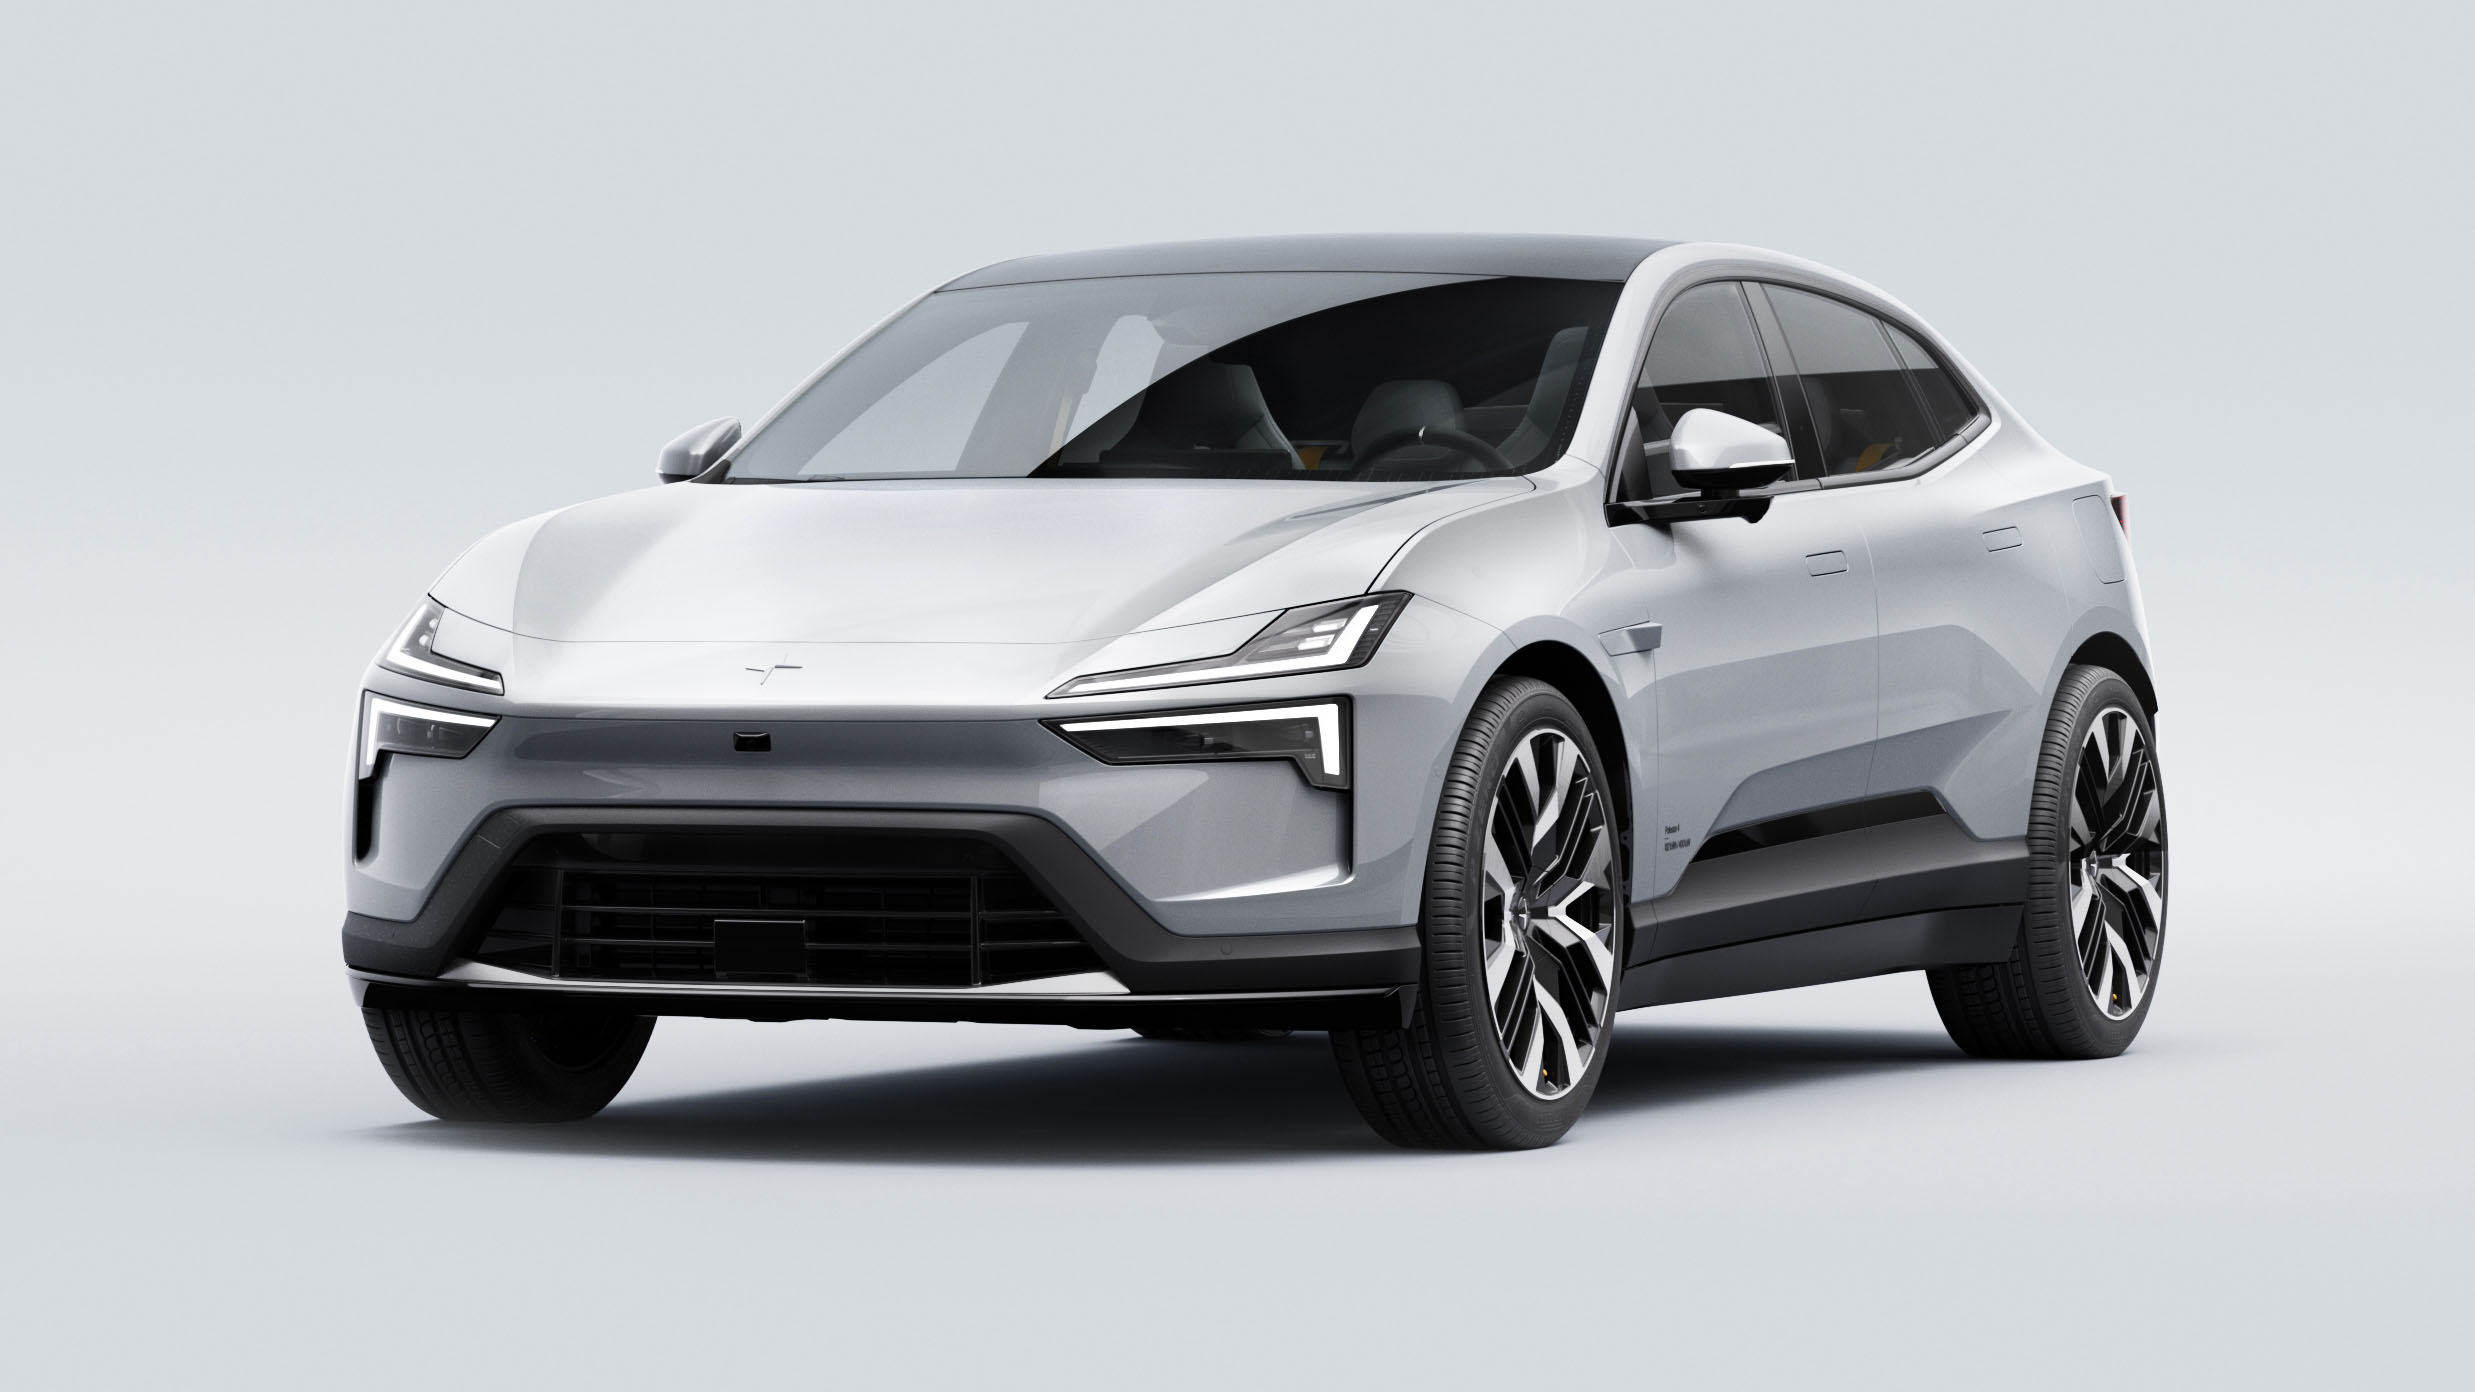 here’s 10 electric coupe crossovers on sale now or in the near future